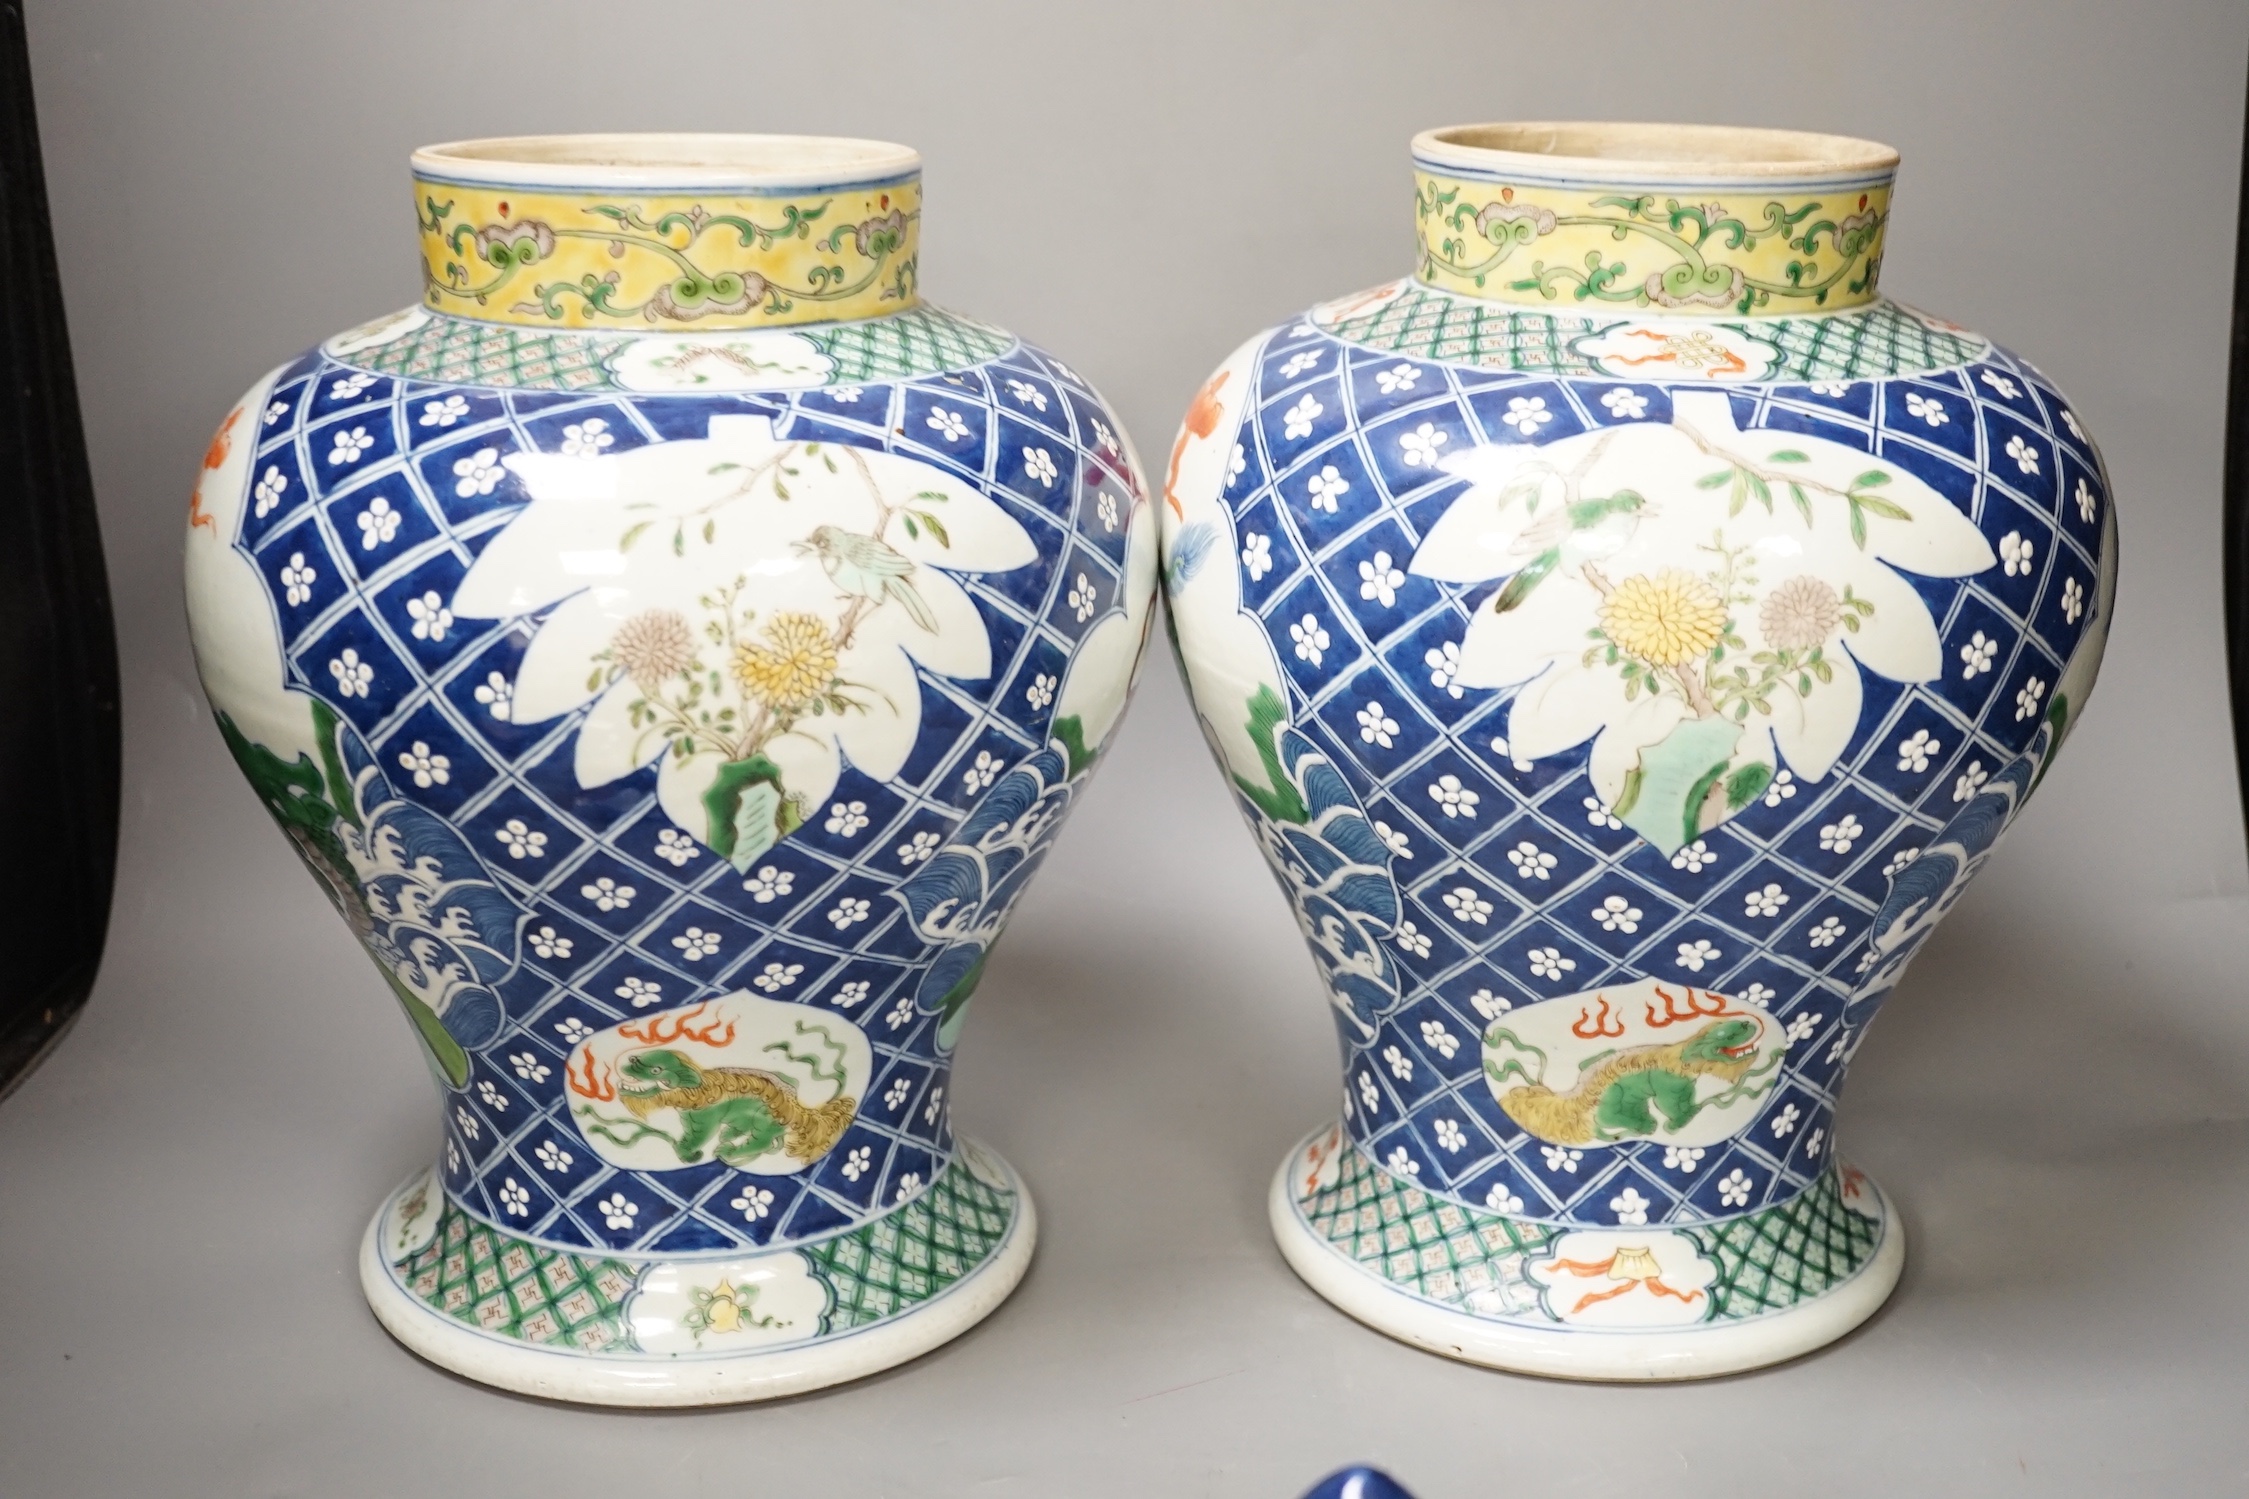 A pair of Chinese baluster jars and covers - 40cm high